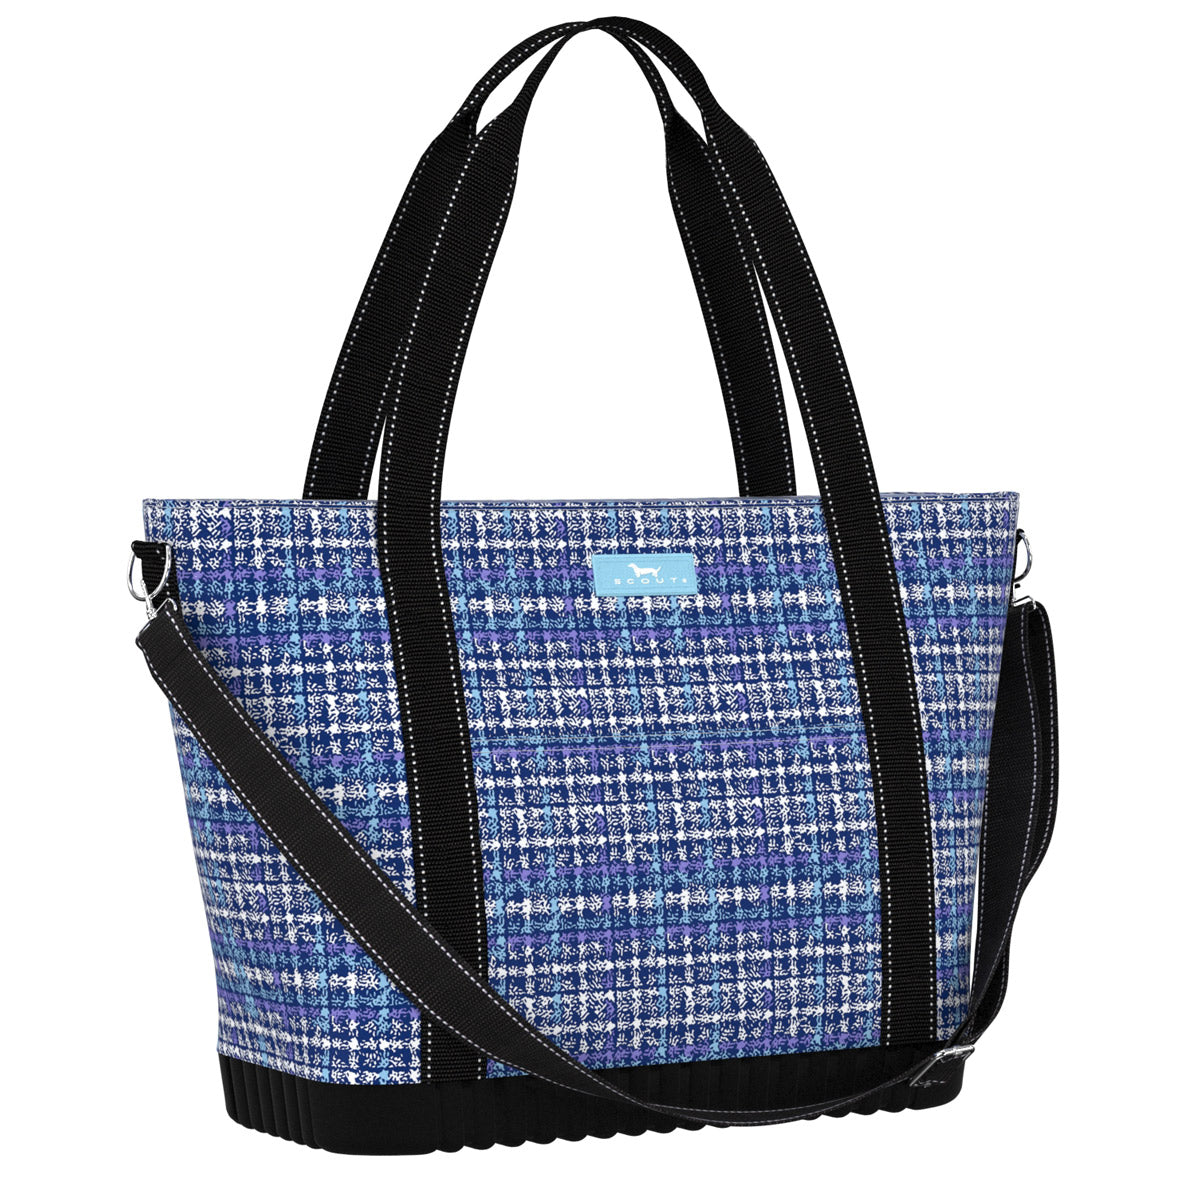 Marketing Plaid Insulated Cooler Bags